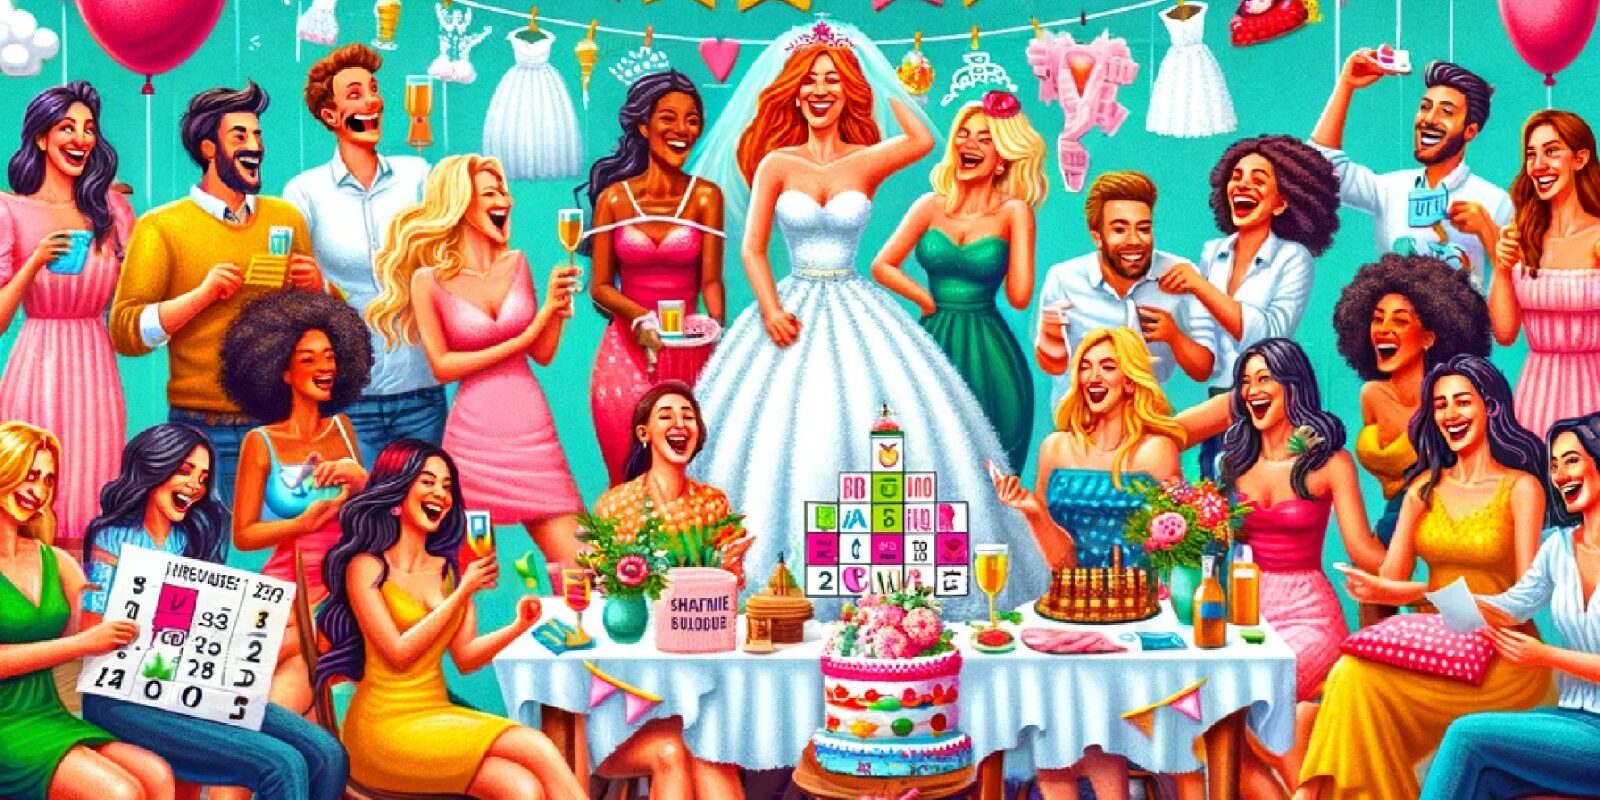 31 Bridal Shower Games: Fun Ideas To Keep Your Guests Entertained